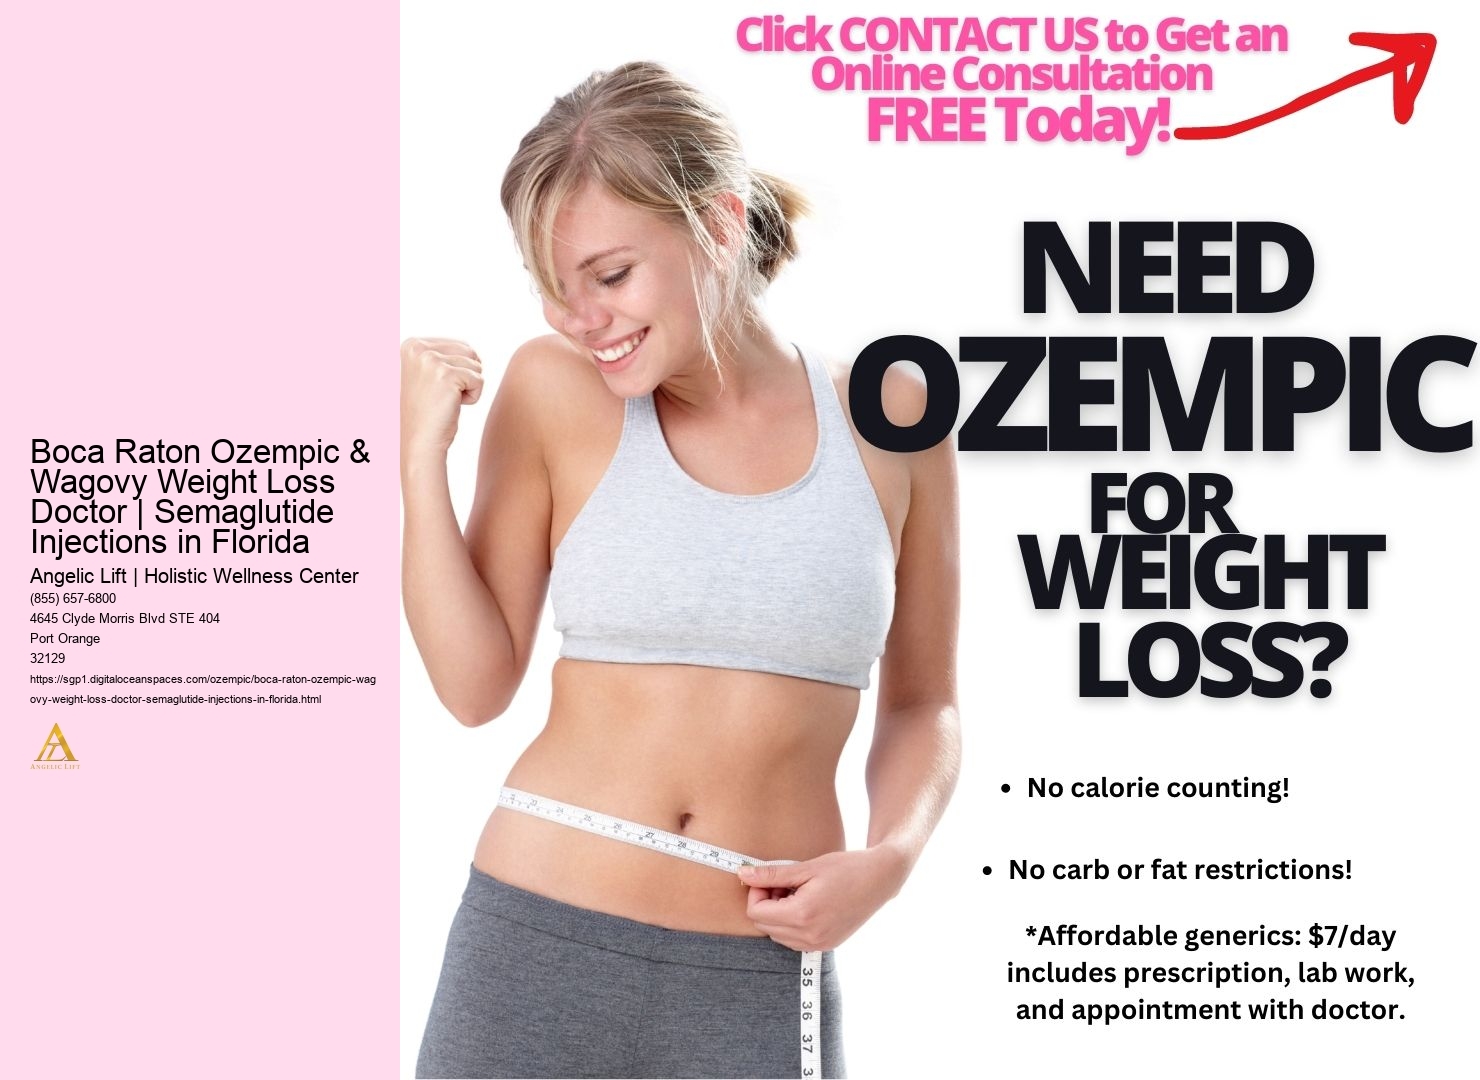 Boca Raton Ozempic & Wagovy Weight Loss Doctor | Semaglutide Injections in Florida